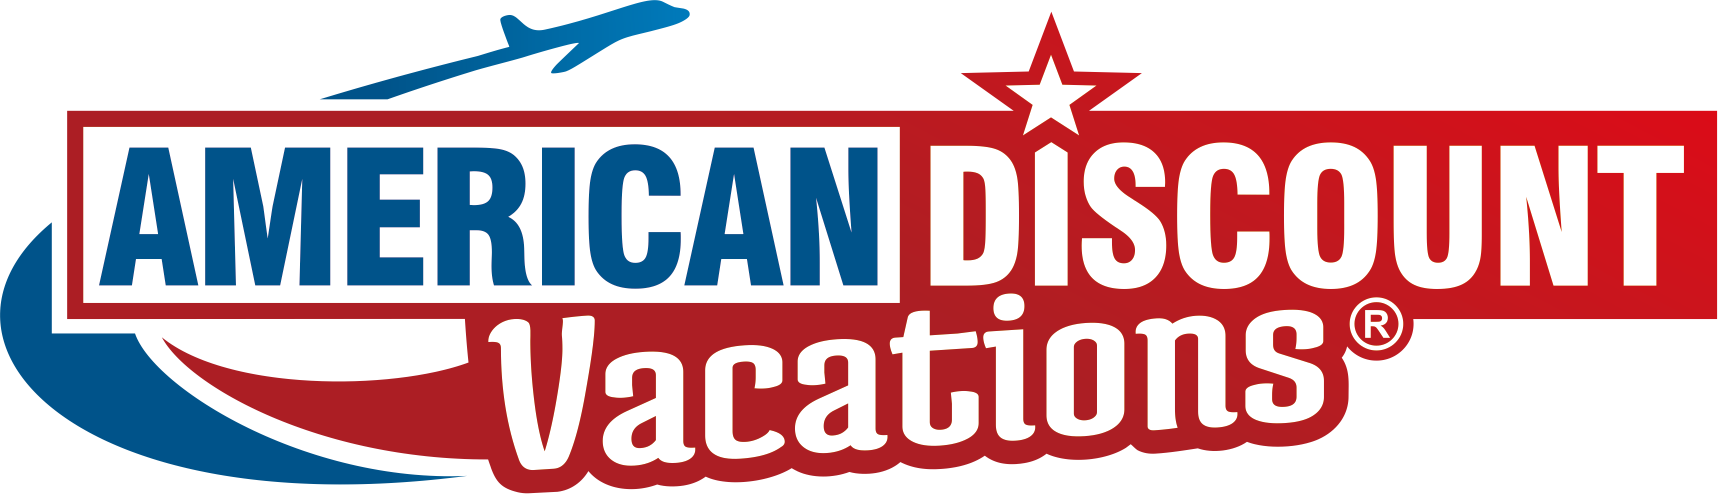 American Discount Vacations